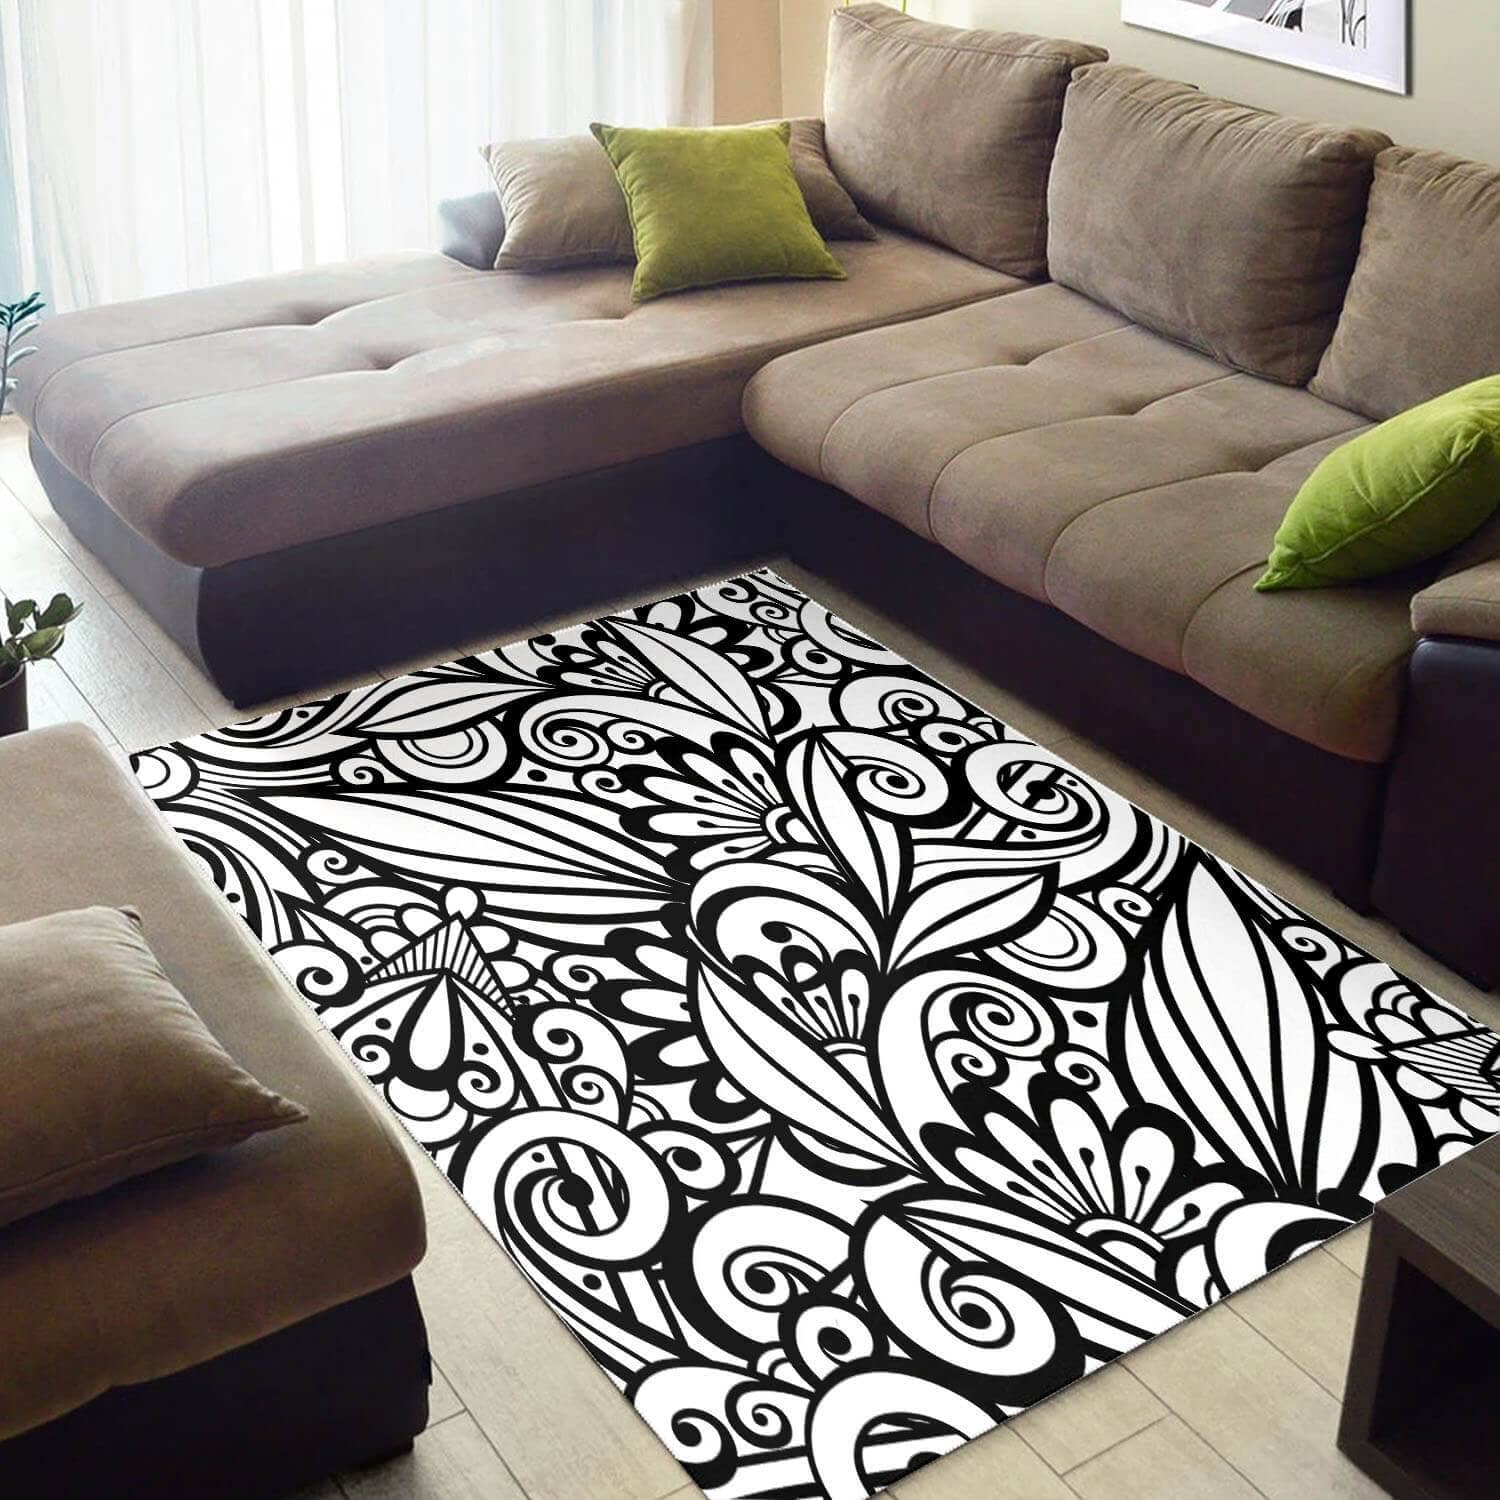 Nice African Holiday Black History Month Afrocentric Pattern Art Style Area Inspired Living Room Rug